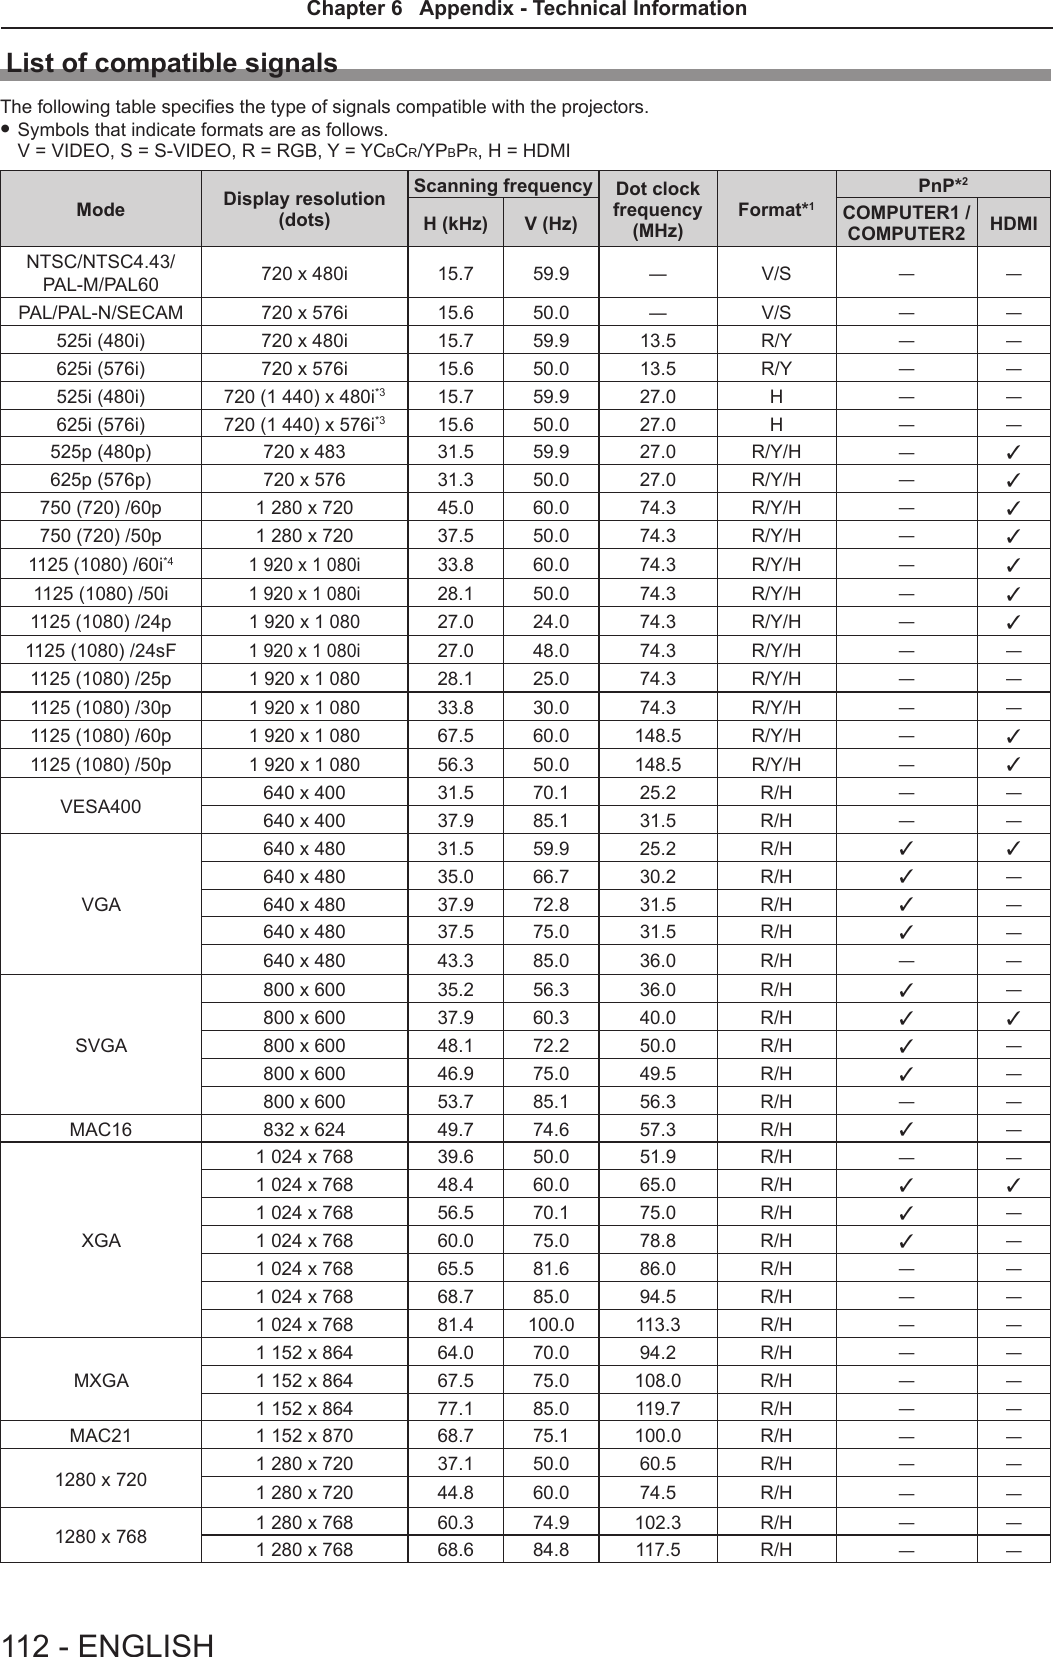 List of compatible signalsThe following table species the type of signals compatible with the projectors. fSymbols that indicate formats are as follows. V = VIDEO, S = S-VIDEO, R = RGB, Y = YCBCR/YPBPR, H = HDMIMode Display resolution(dots)Scanning frequency Dot clock frequency (MHz)Format*1PnP*2H (kHz) V (Hz) COMPUTER1 /COMPUTER2 HDMINTSC/NTSC4.43/PAL-M/PAL60 720 x 480i 15.7 59.9 ― V/S ― ―PAL/PAL-N/SECAM 720 x 576i 15.6 50.0 ― V/S ― ―525i (480i) 720 x 480i 15.7 59.9 13.5 R/Y ― ―625i (576i) 720 x 576i 15.6 50.0 13.5 R/Y ― ―525i (480i) 720 (1 440) x 480i*3 15.7 59.9 27.0 H ― ―625i (576i) 720 (1 440) x 576i*3 15.6 50.0 27.0 H ― ―525p (480p) 720 x 483 31.5 59.9 27.0 R/Y/H ―l625p (576p) 720 x 576 31.3 50.0 27.0 R/Y/H ―l750 (720) /60p 1 280 x 720 45.0 60.0 74.3 R/Y/H ―l750 (720) /50p 1 280 x 720 37.5 50.0 74.3 R/Y/H ―l1125 (1080) /60i*41 920 x 1 080i33.8 60.0 74.3 R/Y/H ―l1125 (1080) /50i1 920 x 1 080i28.1 50.0 74.3 R/Y/H ―l1125 (1080) /24p1 920 x 1 08027.0 24.0 74.3 R/Y/H ―l1125 (1080) /24sF1 920 x 1 080i27.0 48.0 74.3 R/Y/H ― ―1125 (1080) /25p1 920 x 1 08028.1 25.0 74.3 R/Y/H ― ―1125 (1080) /30p1 920 x 1 08033.8 30.0 74.3 R/Y/H ― ―1125 (1080) /60p1 920 x 1 08067.5 60.0 148.5 R/Y/H ―l1125 (1080) /50p1 920 x 1 08056.3 50.0 148.5 R/Y/H ―lVESA400 640 x 400 31.5 70.1 25.2 R/H ― ―640 x 400 37.9 85.1 31.5 R/H ― ―VGA640 x 480 31.5 59.9 25.2 R/H l l640 x 480 35.0 66.7 30.2 R/H l―640 x 480 37.9 72.8 31.5 R/H l―640 x 480 37.5 75.0 31.5 R/H l―640 x 480 43.3 85.0 36.0 R/H ― ―SVGA800 x 600 35.2 56.3 36.0 R/H l―800 x 600 37.9 60.3 40.0 R/H l l800 x 600 48.1 72.2 50.0 R/H l―800 x 600 46.9 75.0 49.5 R/H l―800 x 600 53.7 85.1 56.3 R/H ― ―MAC16 832 x 624 49.7 74.6 57.3 R/H l―XGA1 024 x 768 39.6 50.0 51.9 R/H ― ―1 024 x 768 48.4 60.0 65.0 R/H l l1 024 x 768 56.5 70.1 75.0 R/H l―1 024 x 768 60.0 75.0 78.8 R/H l―1 024 x 768 65.5 81.6 86.0 R/H ― ―1 024 x 768 68.7 85.0 94.5 R/H ― ―1 024 x 768 81.4 100.0 113.3 R/H ― ―MXGA1 152 x 864 64.0 70.0 94.2 R/H ― ―1 152 x 864 67.5 75.0 108.0 R/H ― ―1 152 x 864 77.1 85.0 119.7 R/H ― ―MAC21 1 152 x 870 68.7 75.1 100.0 R/H ― ―1280 x 720 1 280 x 720 37.1 50.0 60.5 R/H ― ―1 280 x 720 44.8 60.0 74.5 R/H ― ―1280 x 768 1 280 x 768 60.3 74.9 102.3 R/H ― ―1 280 x 768 68.6 84.8 117.5 R/H ― ―112 - ENGLISHChapter 6   Appendix - Technical Information